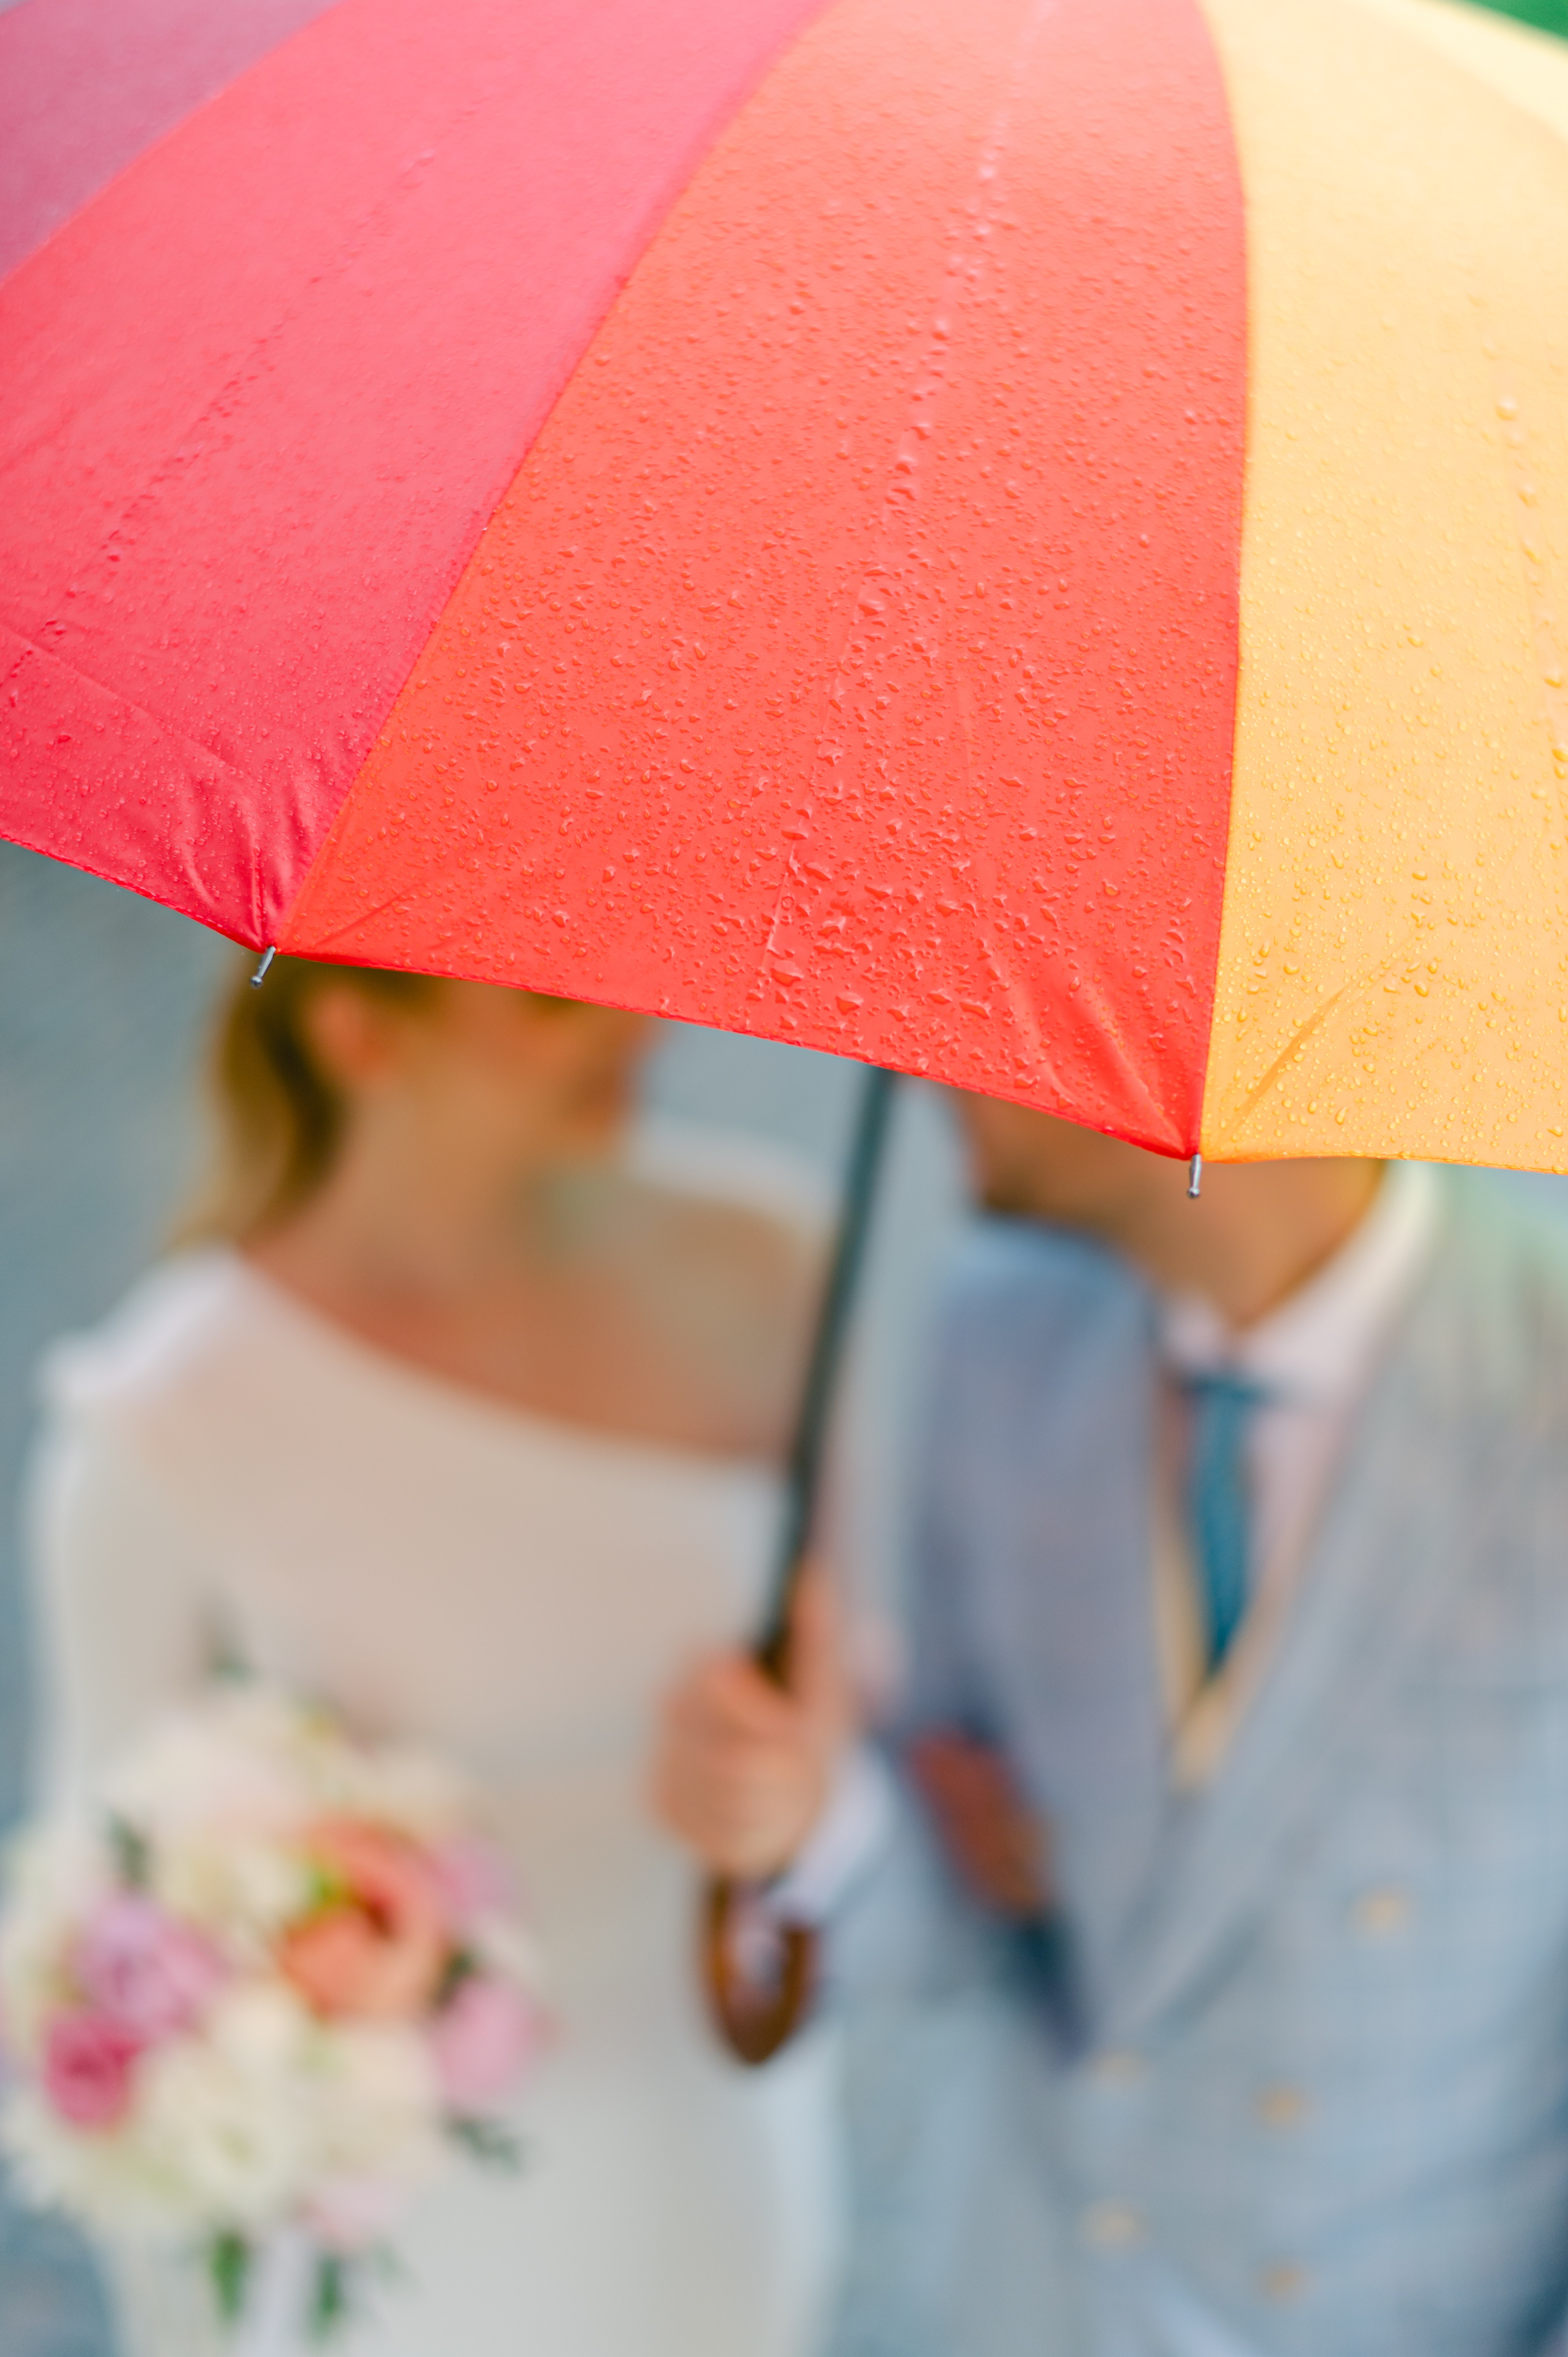 The old saying goes, "Rain is good luck on your wedding day!" We say, "Let's avoid hurricane season!" When is the best time to plan a wedding in Mexico and the Caribbean?